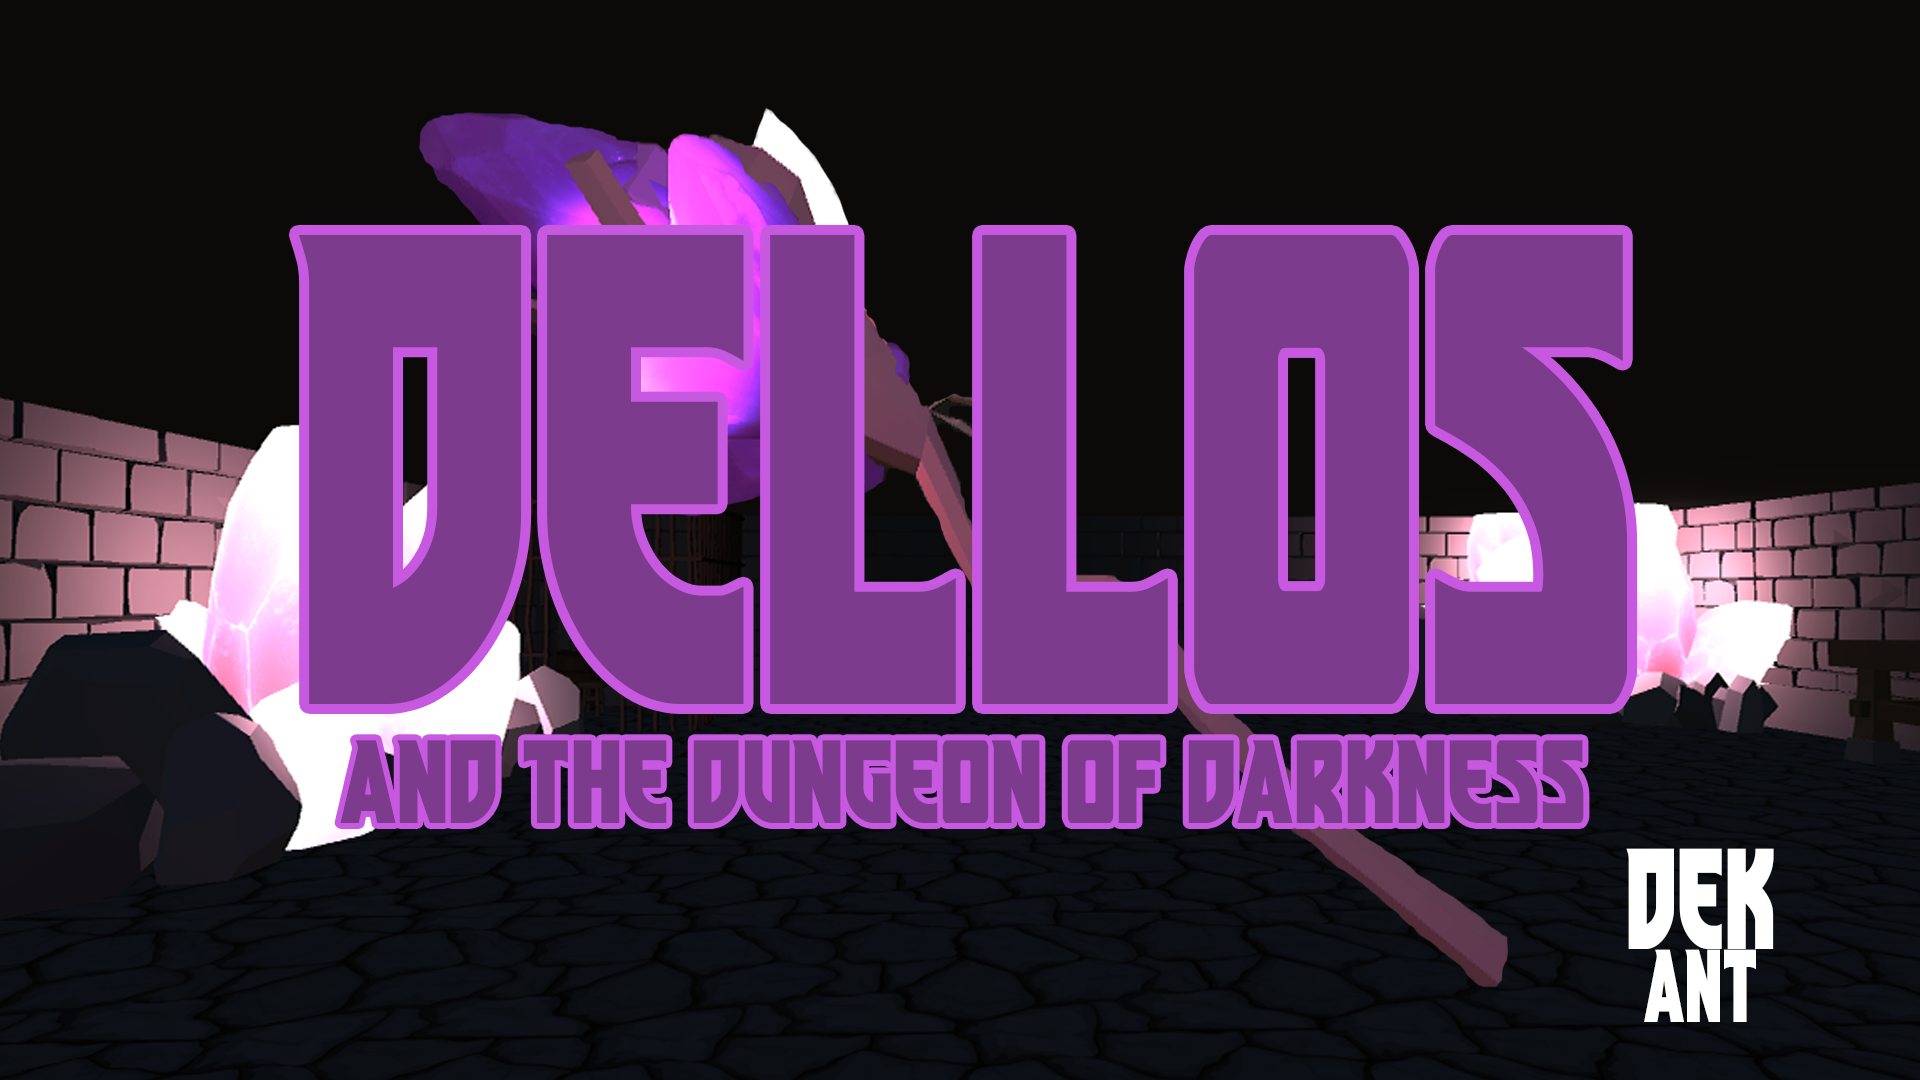 DELLOS AND THE DUNGEON OF DARKNESS